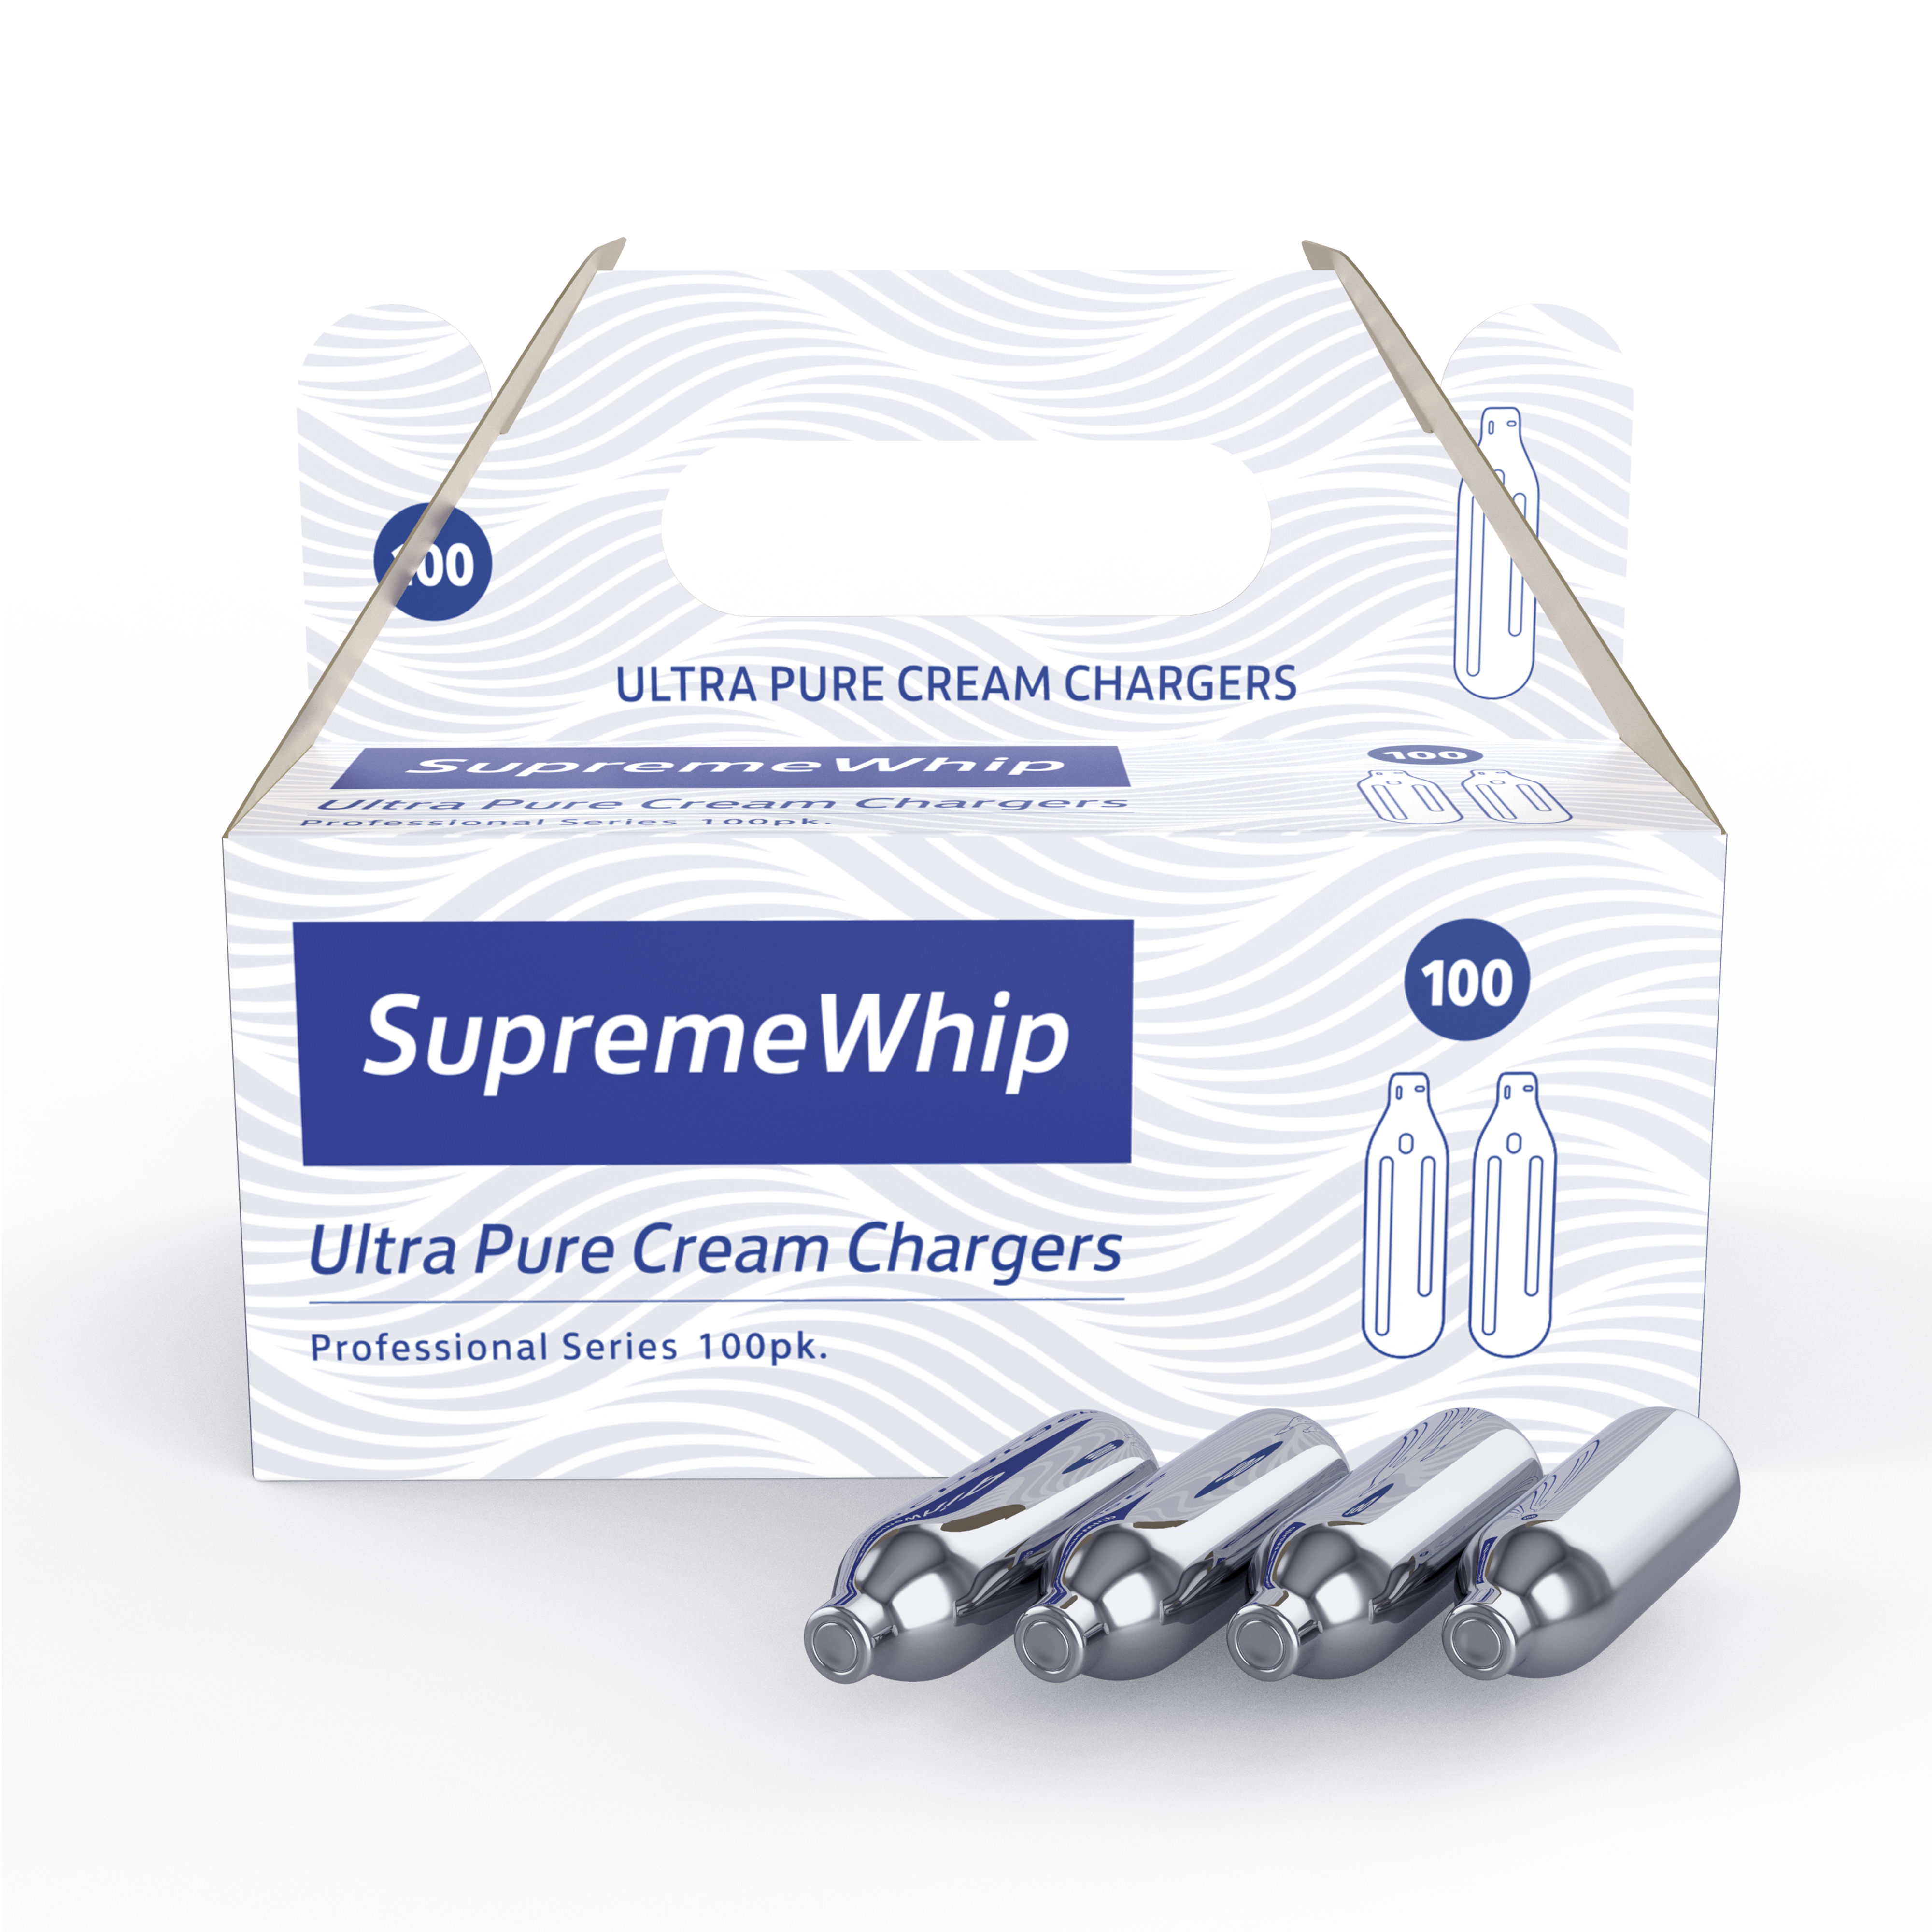 SupremeWhip Cream Chargers - 100 Pack